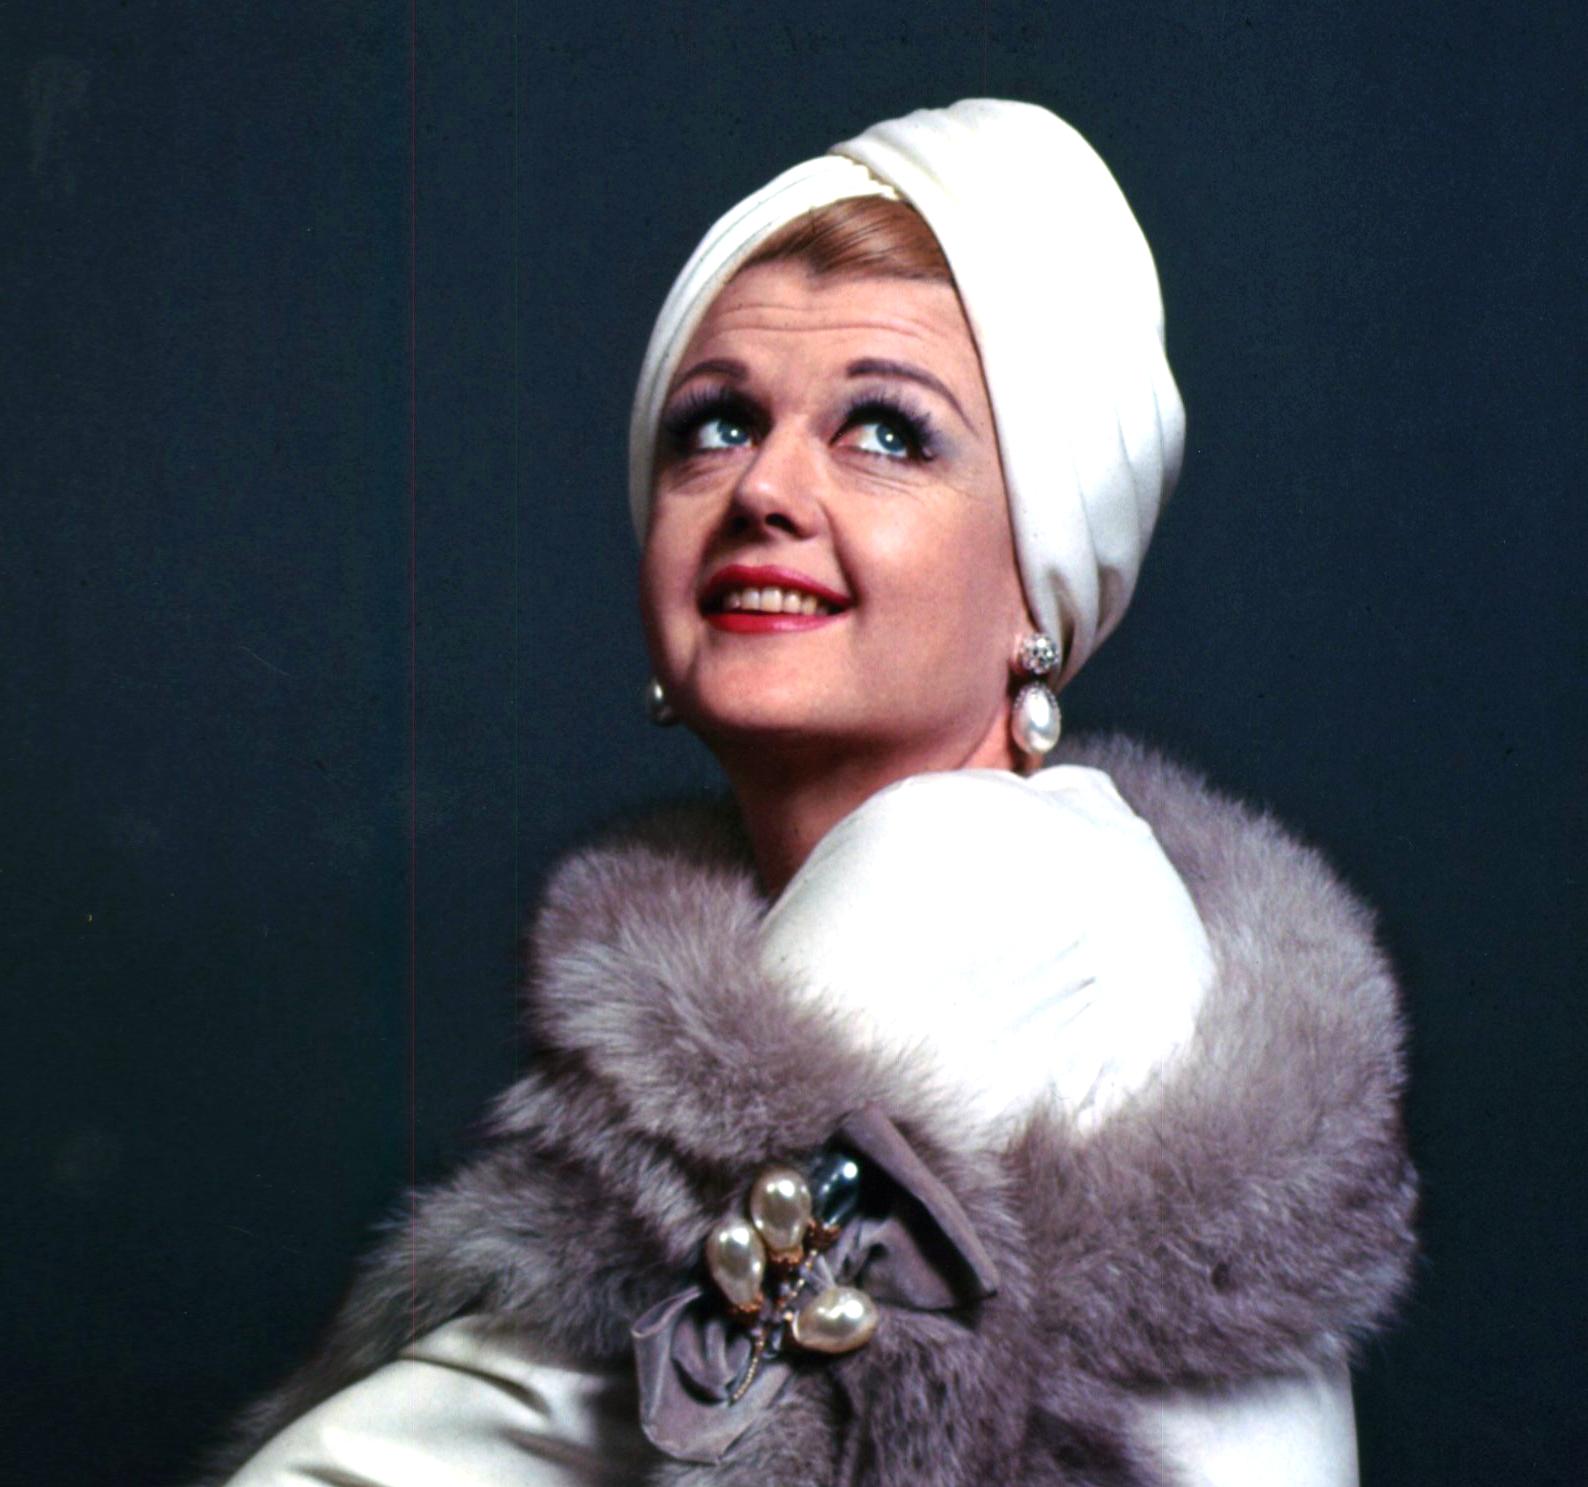 Broadway star Angela Lansbury as 'Mame', signed by Angela Lansbury - Photograph by Jack Mitchell